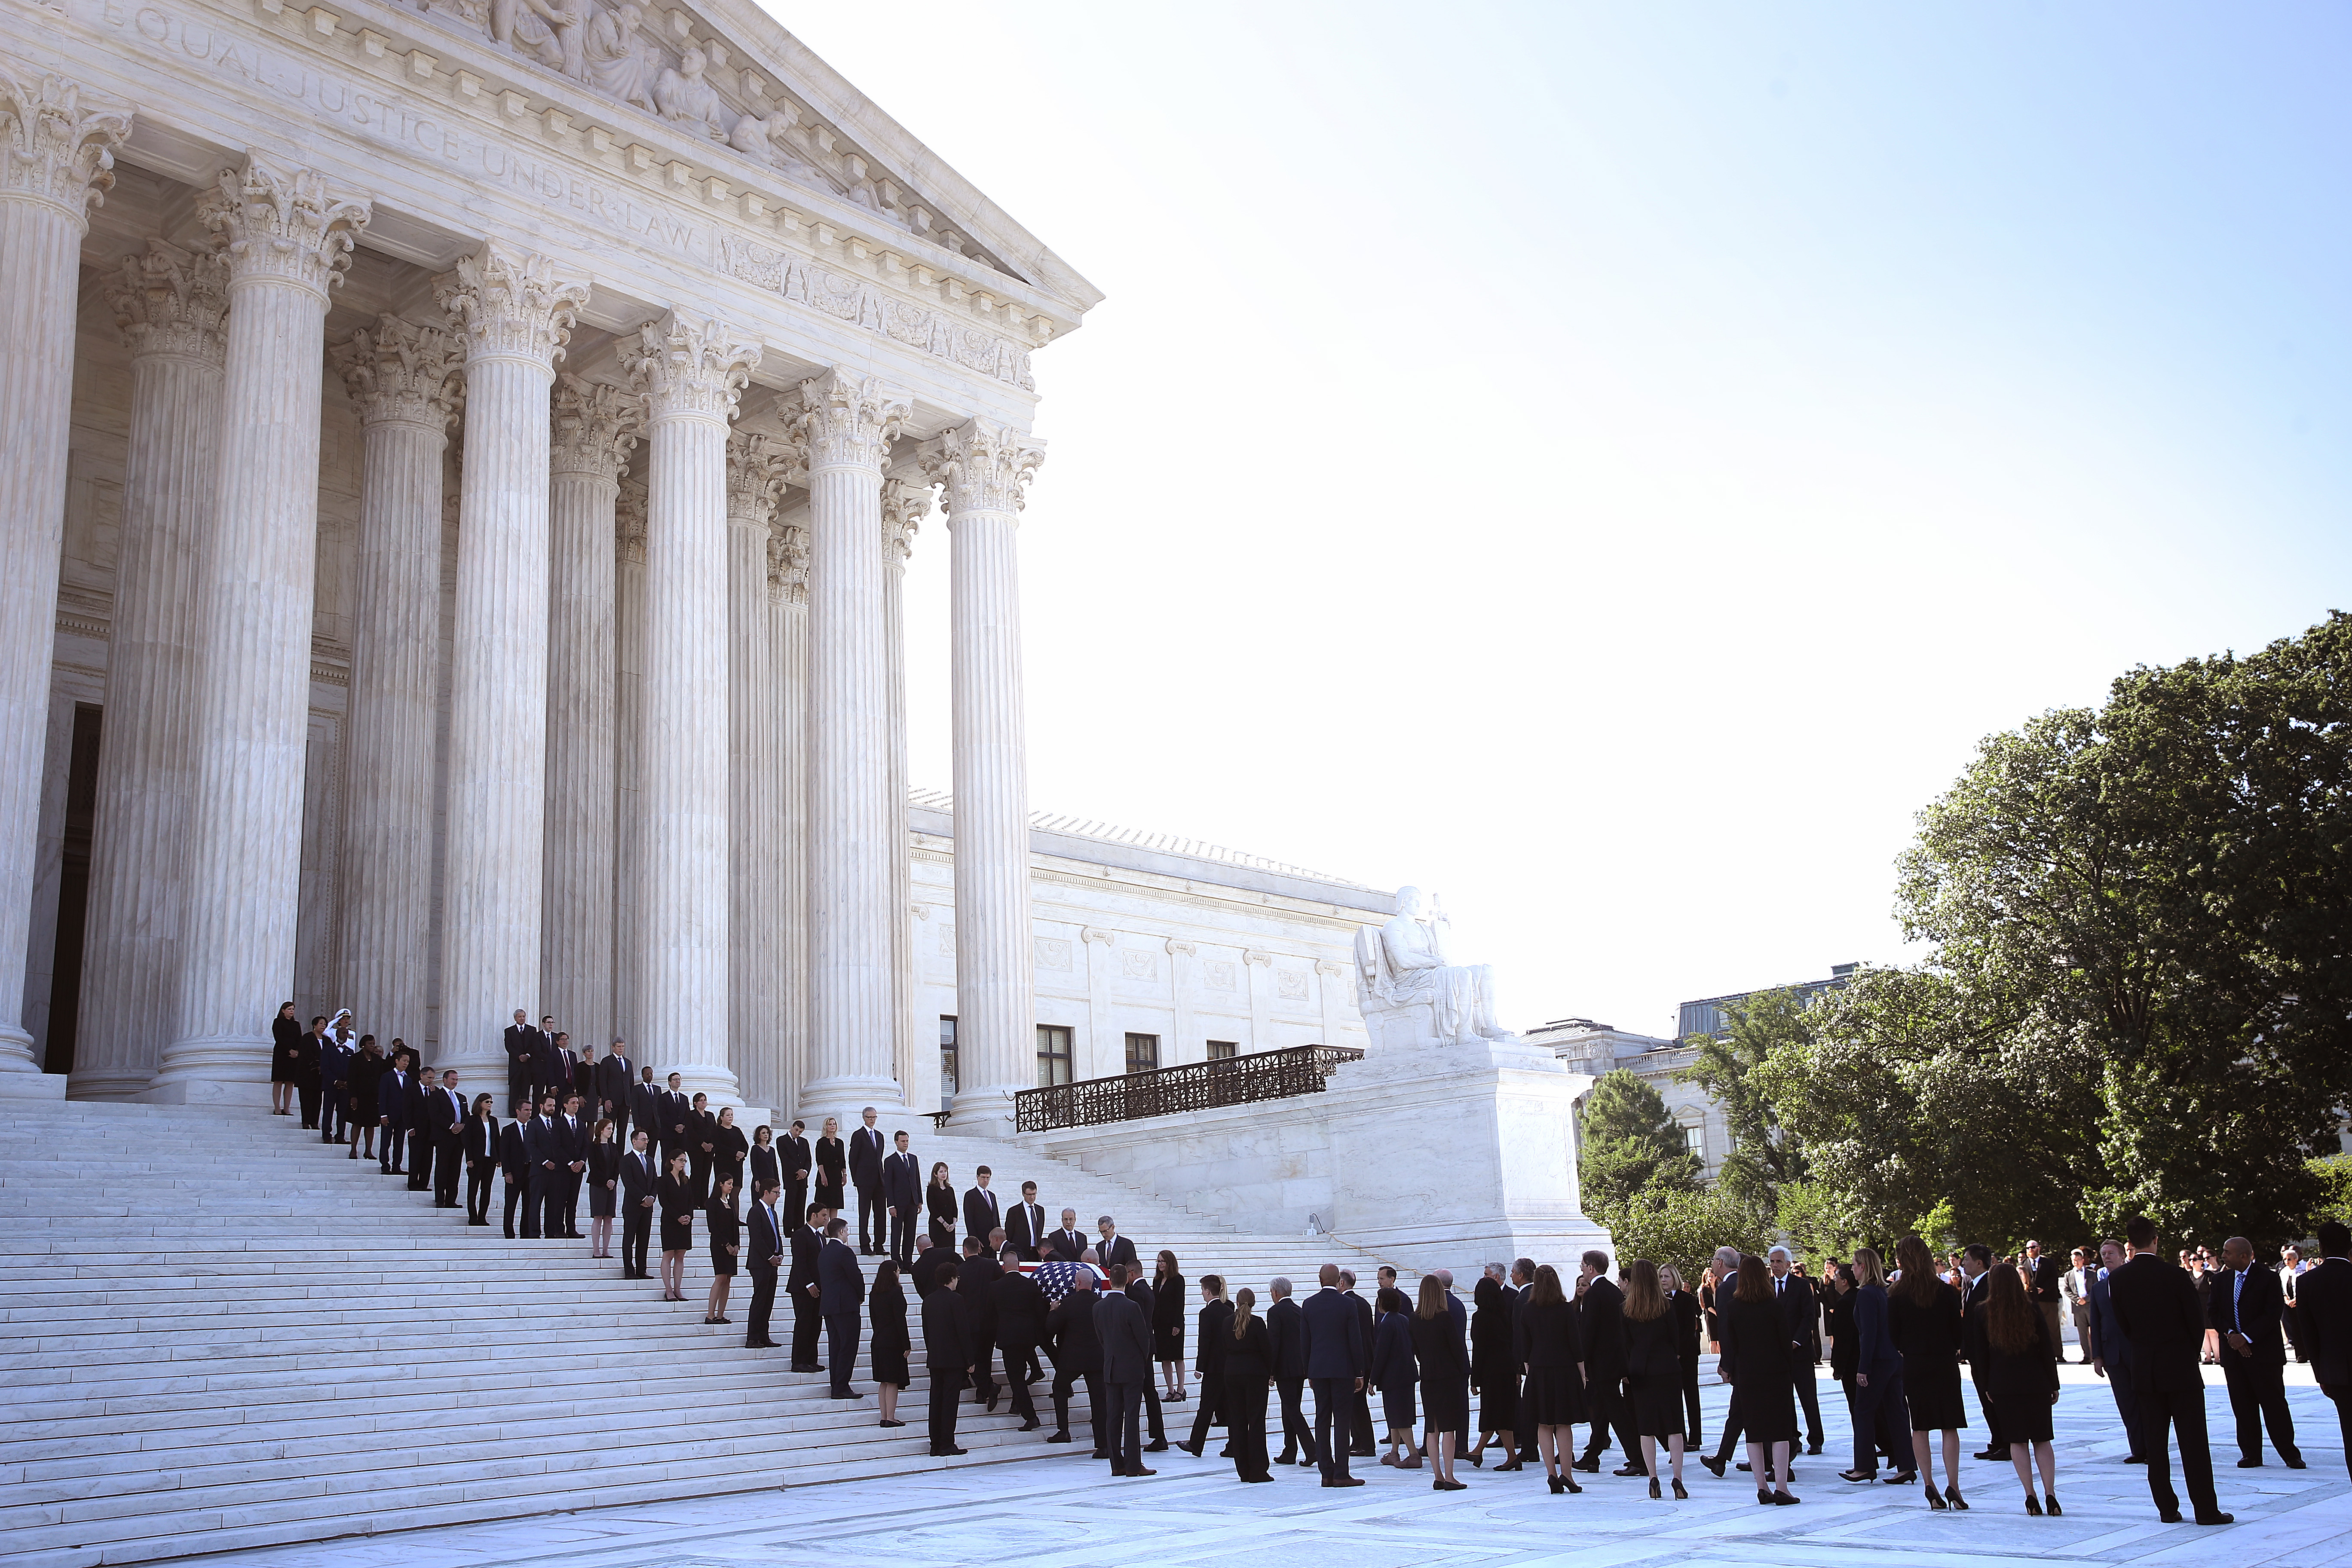 Pallbearers carry the casket of the late Justice John Paul Stevens up the steps of the Supreme Court. (Win McNamee/Getty Images)